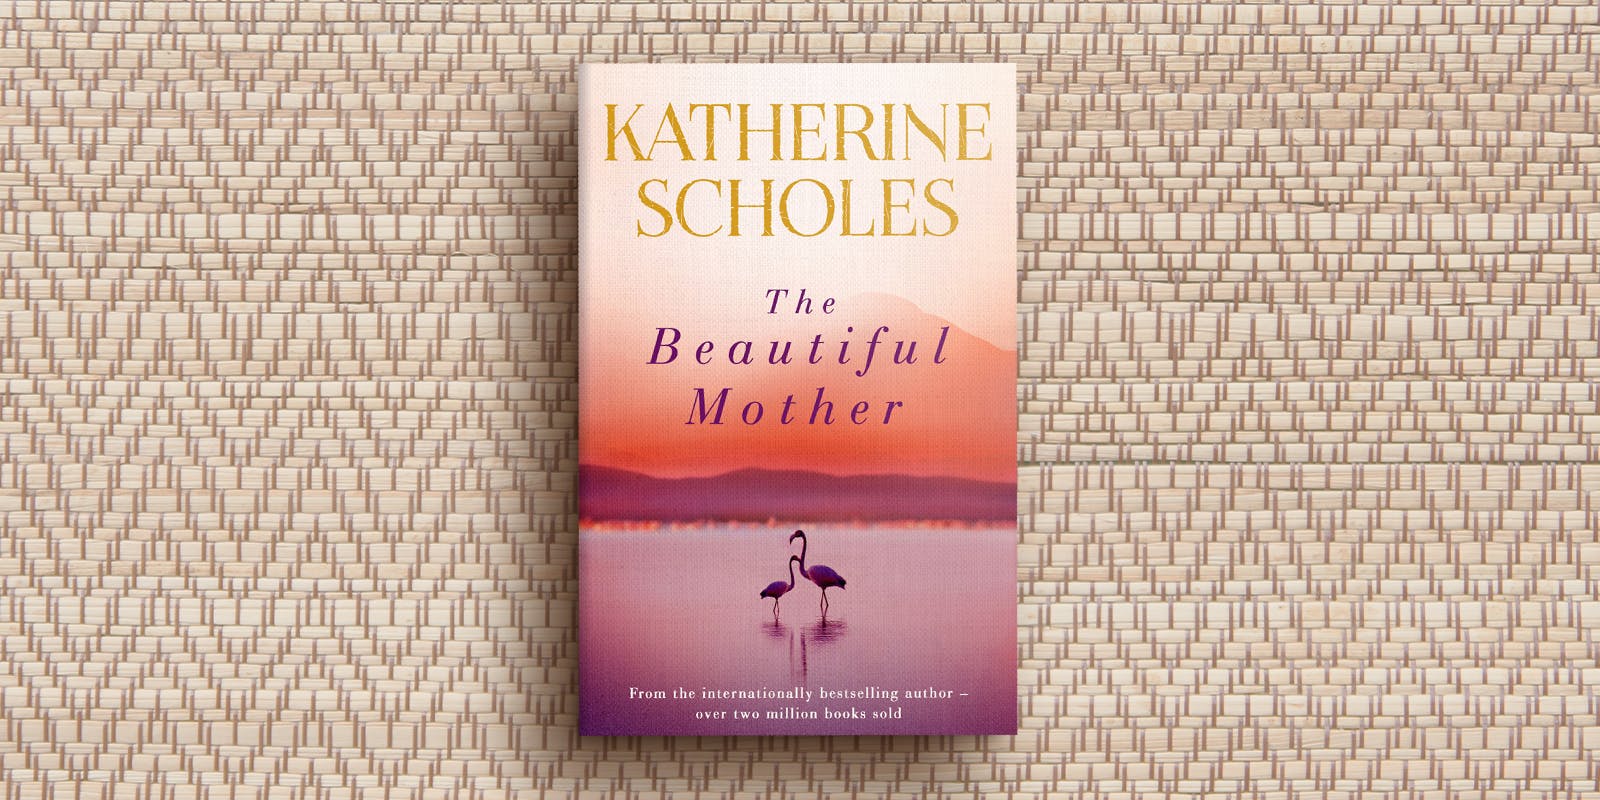 The Beautiful Mother book club notes